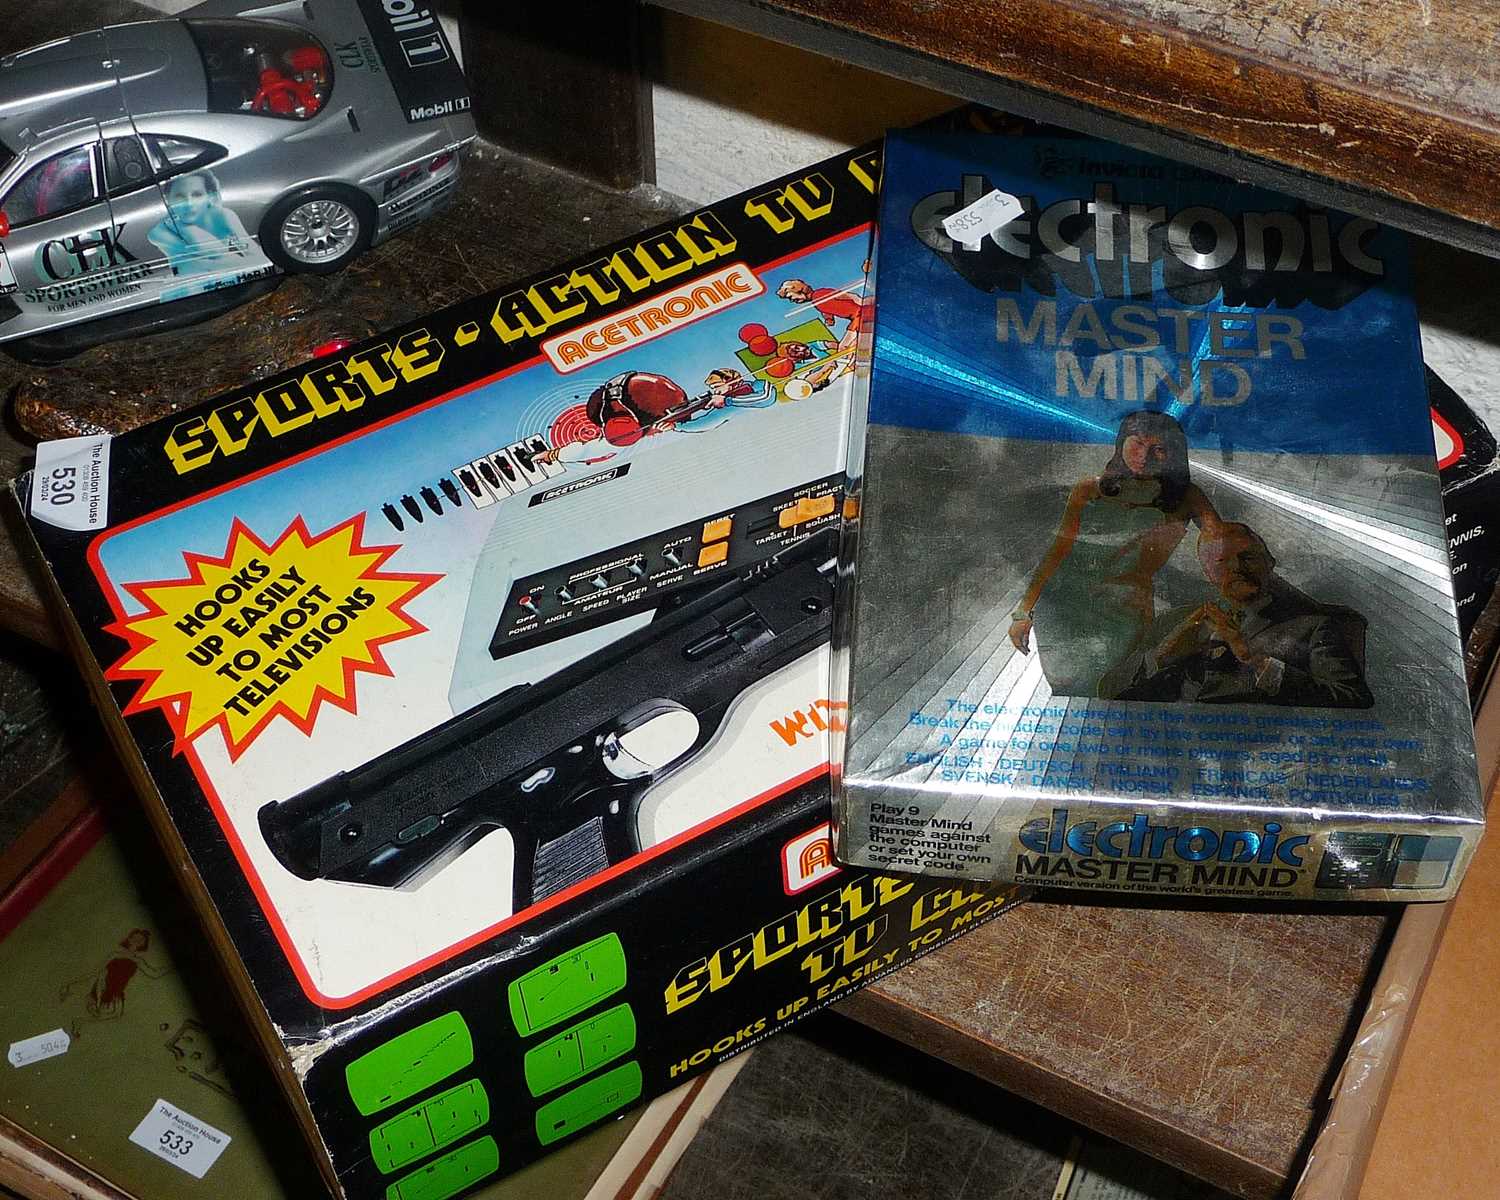 Vintage Electronic Mastermind game, and a Sports Action Acetronic TV game in box